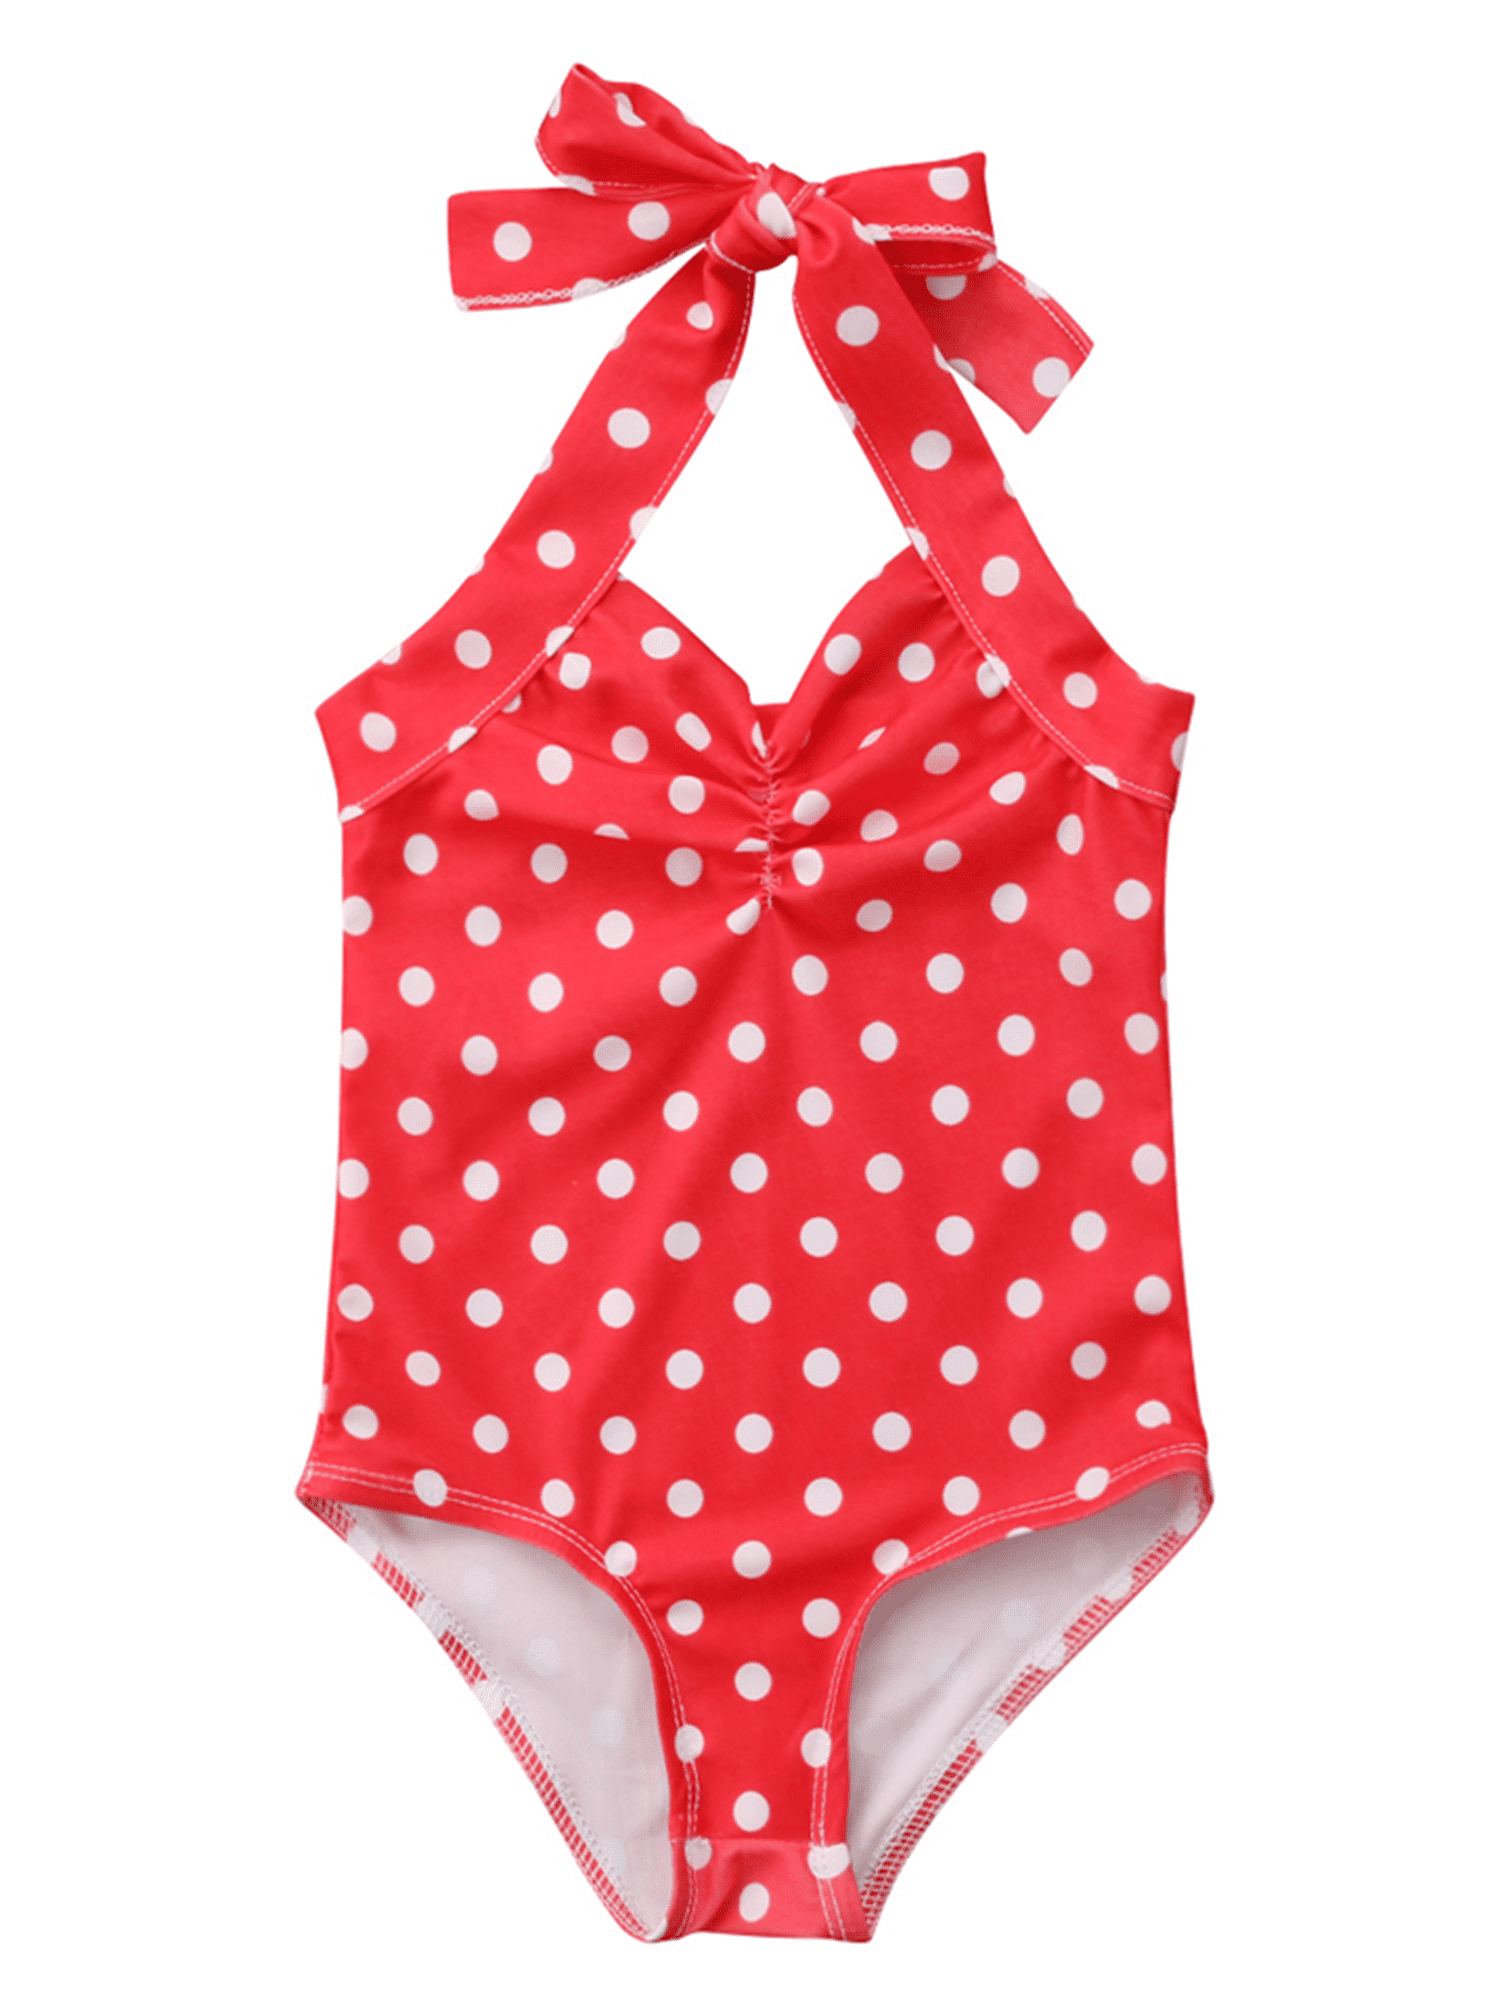 Cute Girls One Piece Swimsuit Plain Red Color Kids Swimwear With Embroidery  And Tassels - Buy China Wholesale Swimwear $3.8